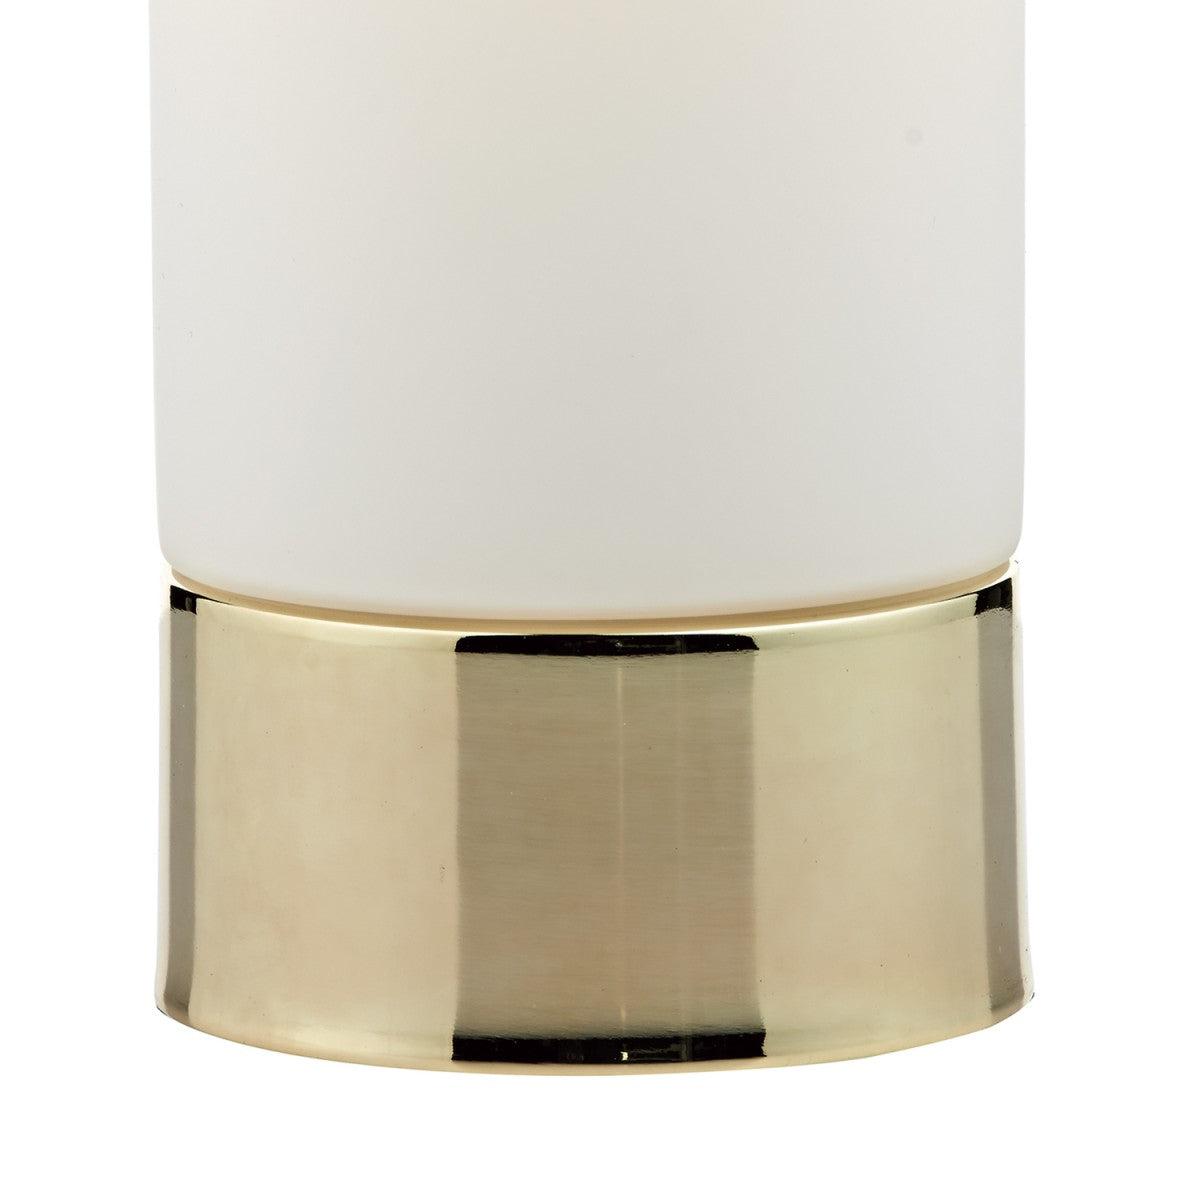 Gold Touch Lamp - The Nancy Smillie Shop - Art, Jewellery & Designer Gifts Glasgow